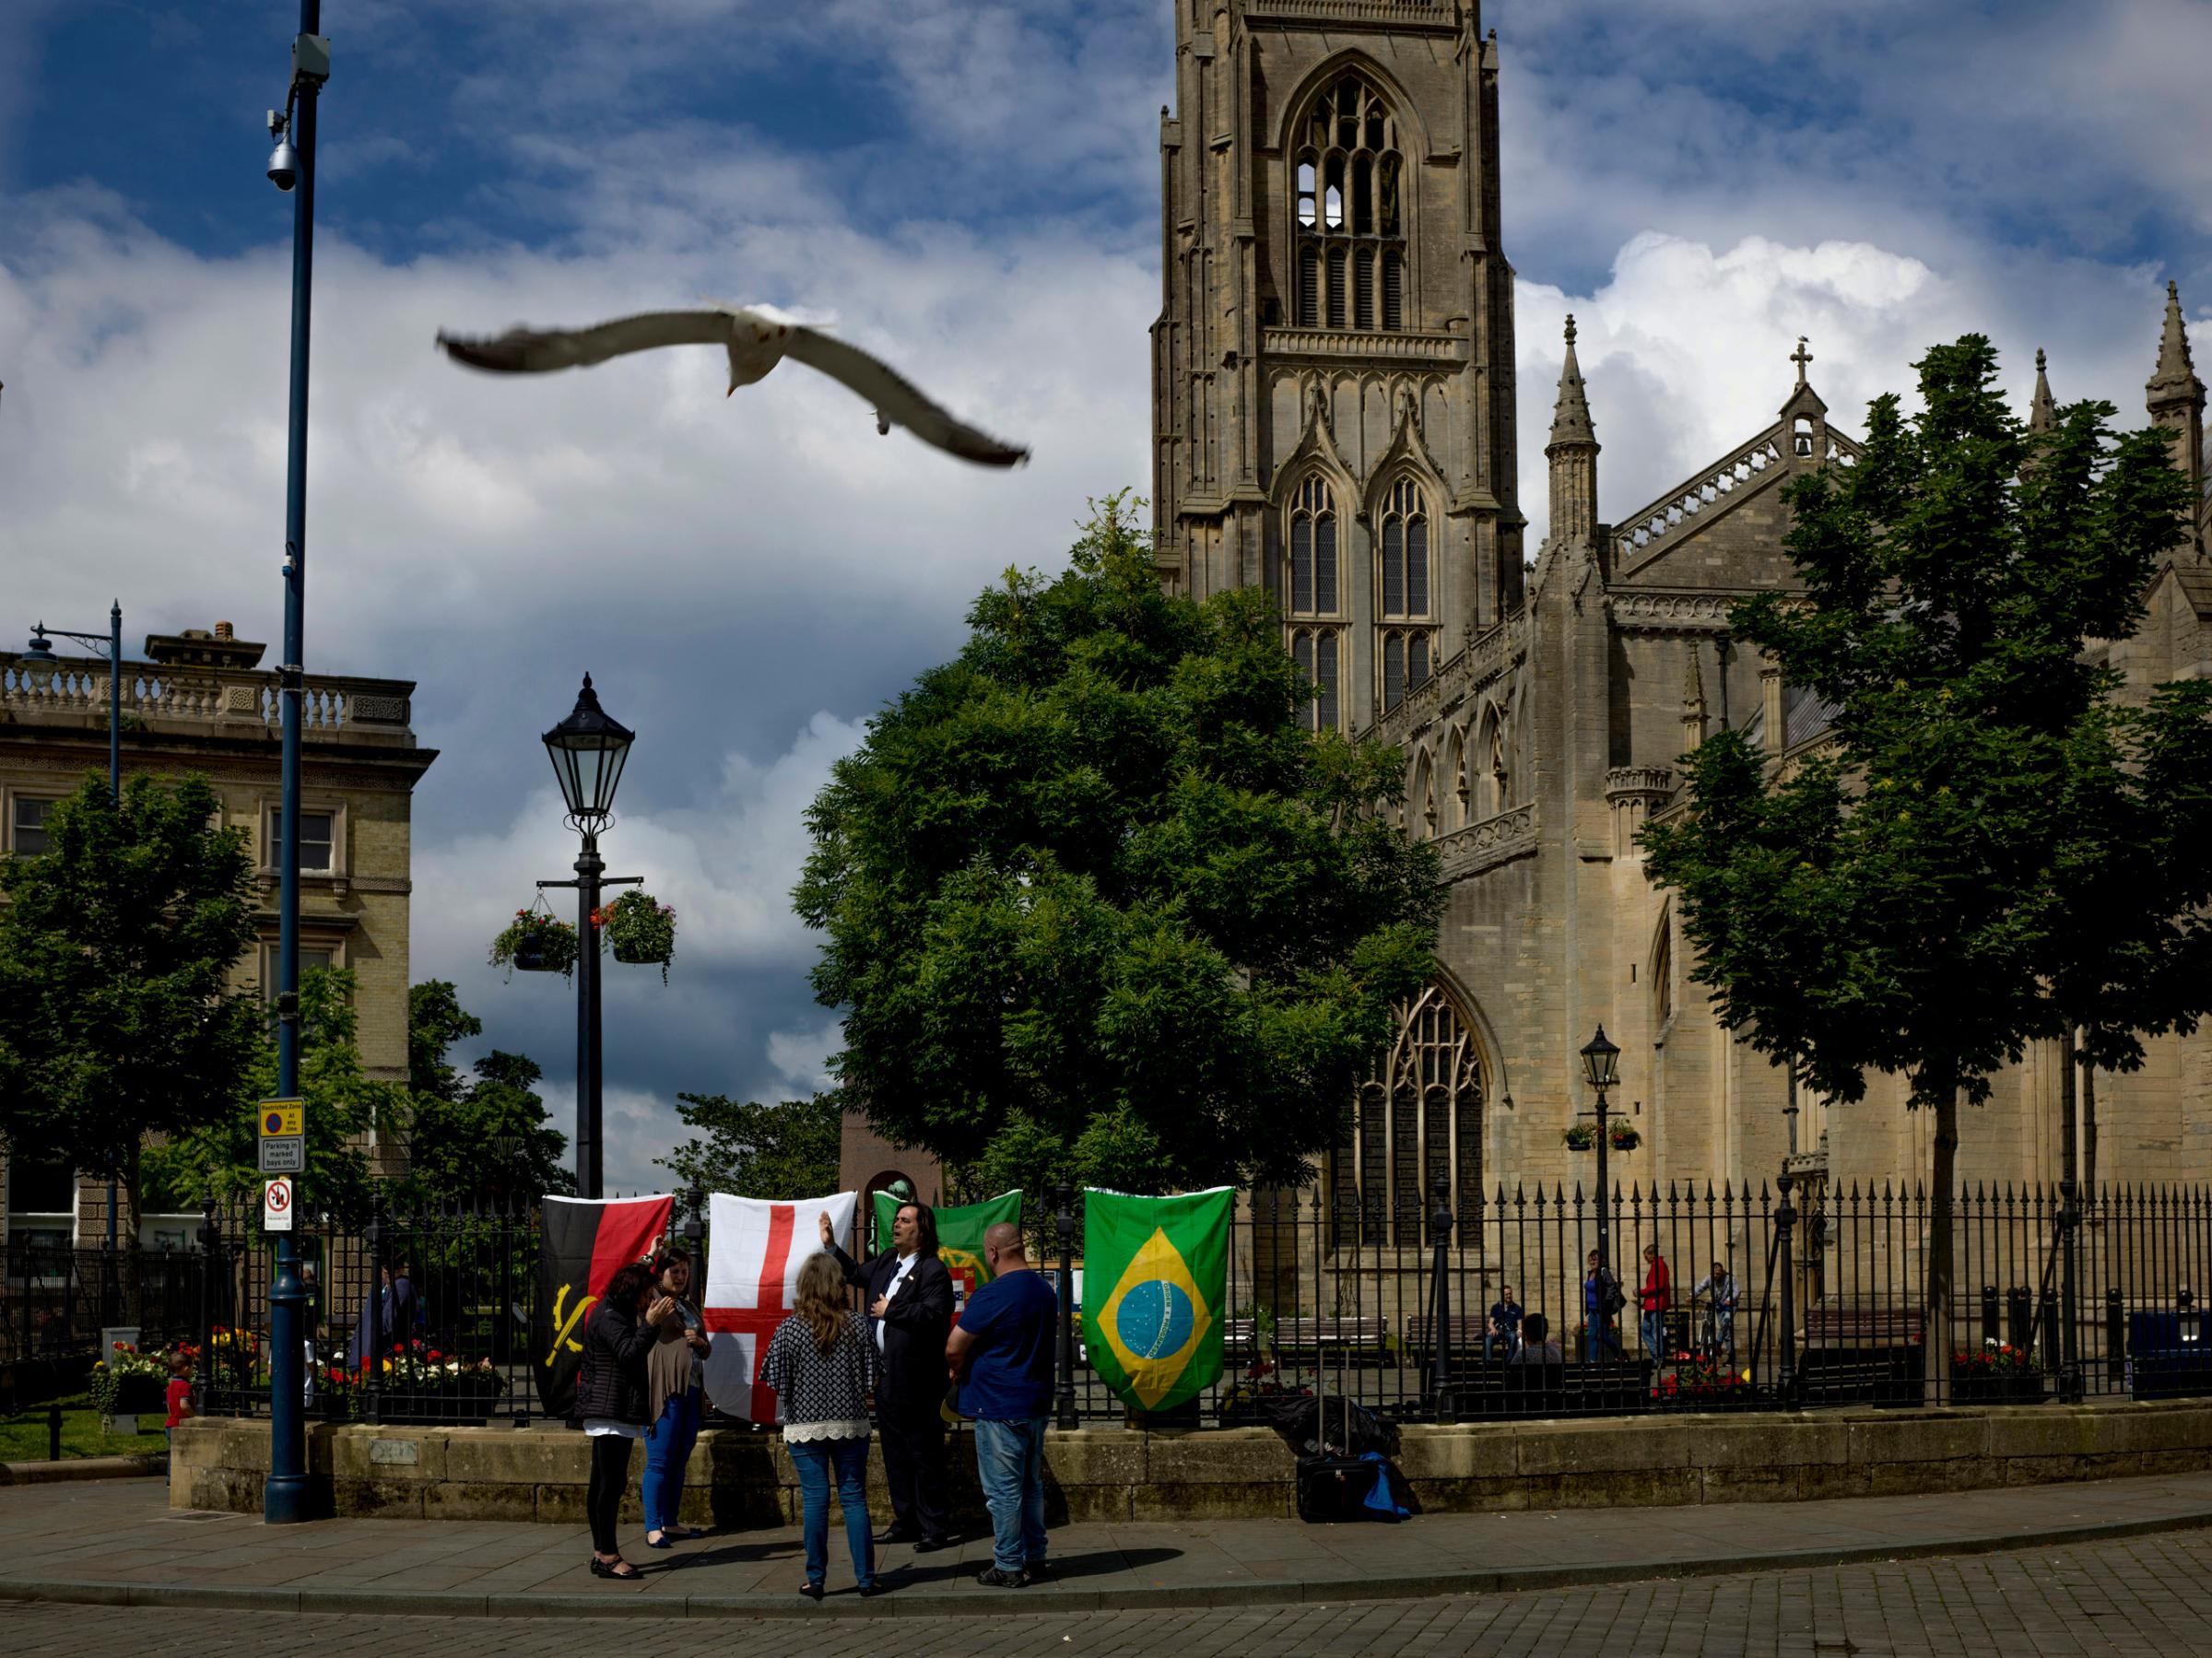 Members of a newly organized church group from Portugal and Brazil stand in Boston’s main square singing prayers. Boston, Lincolnshire, June 26, 2016.